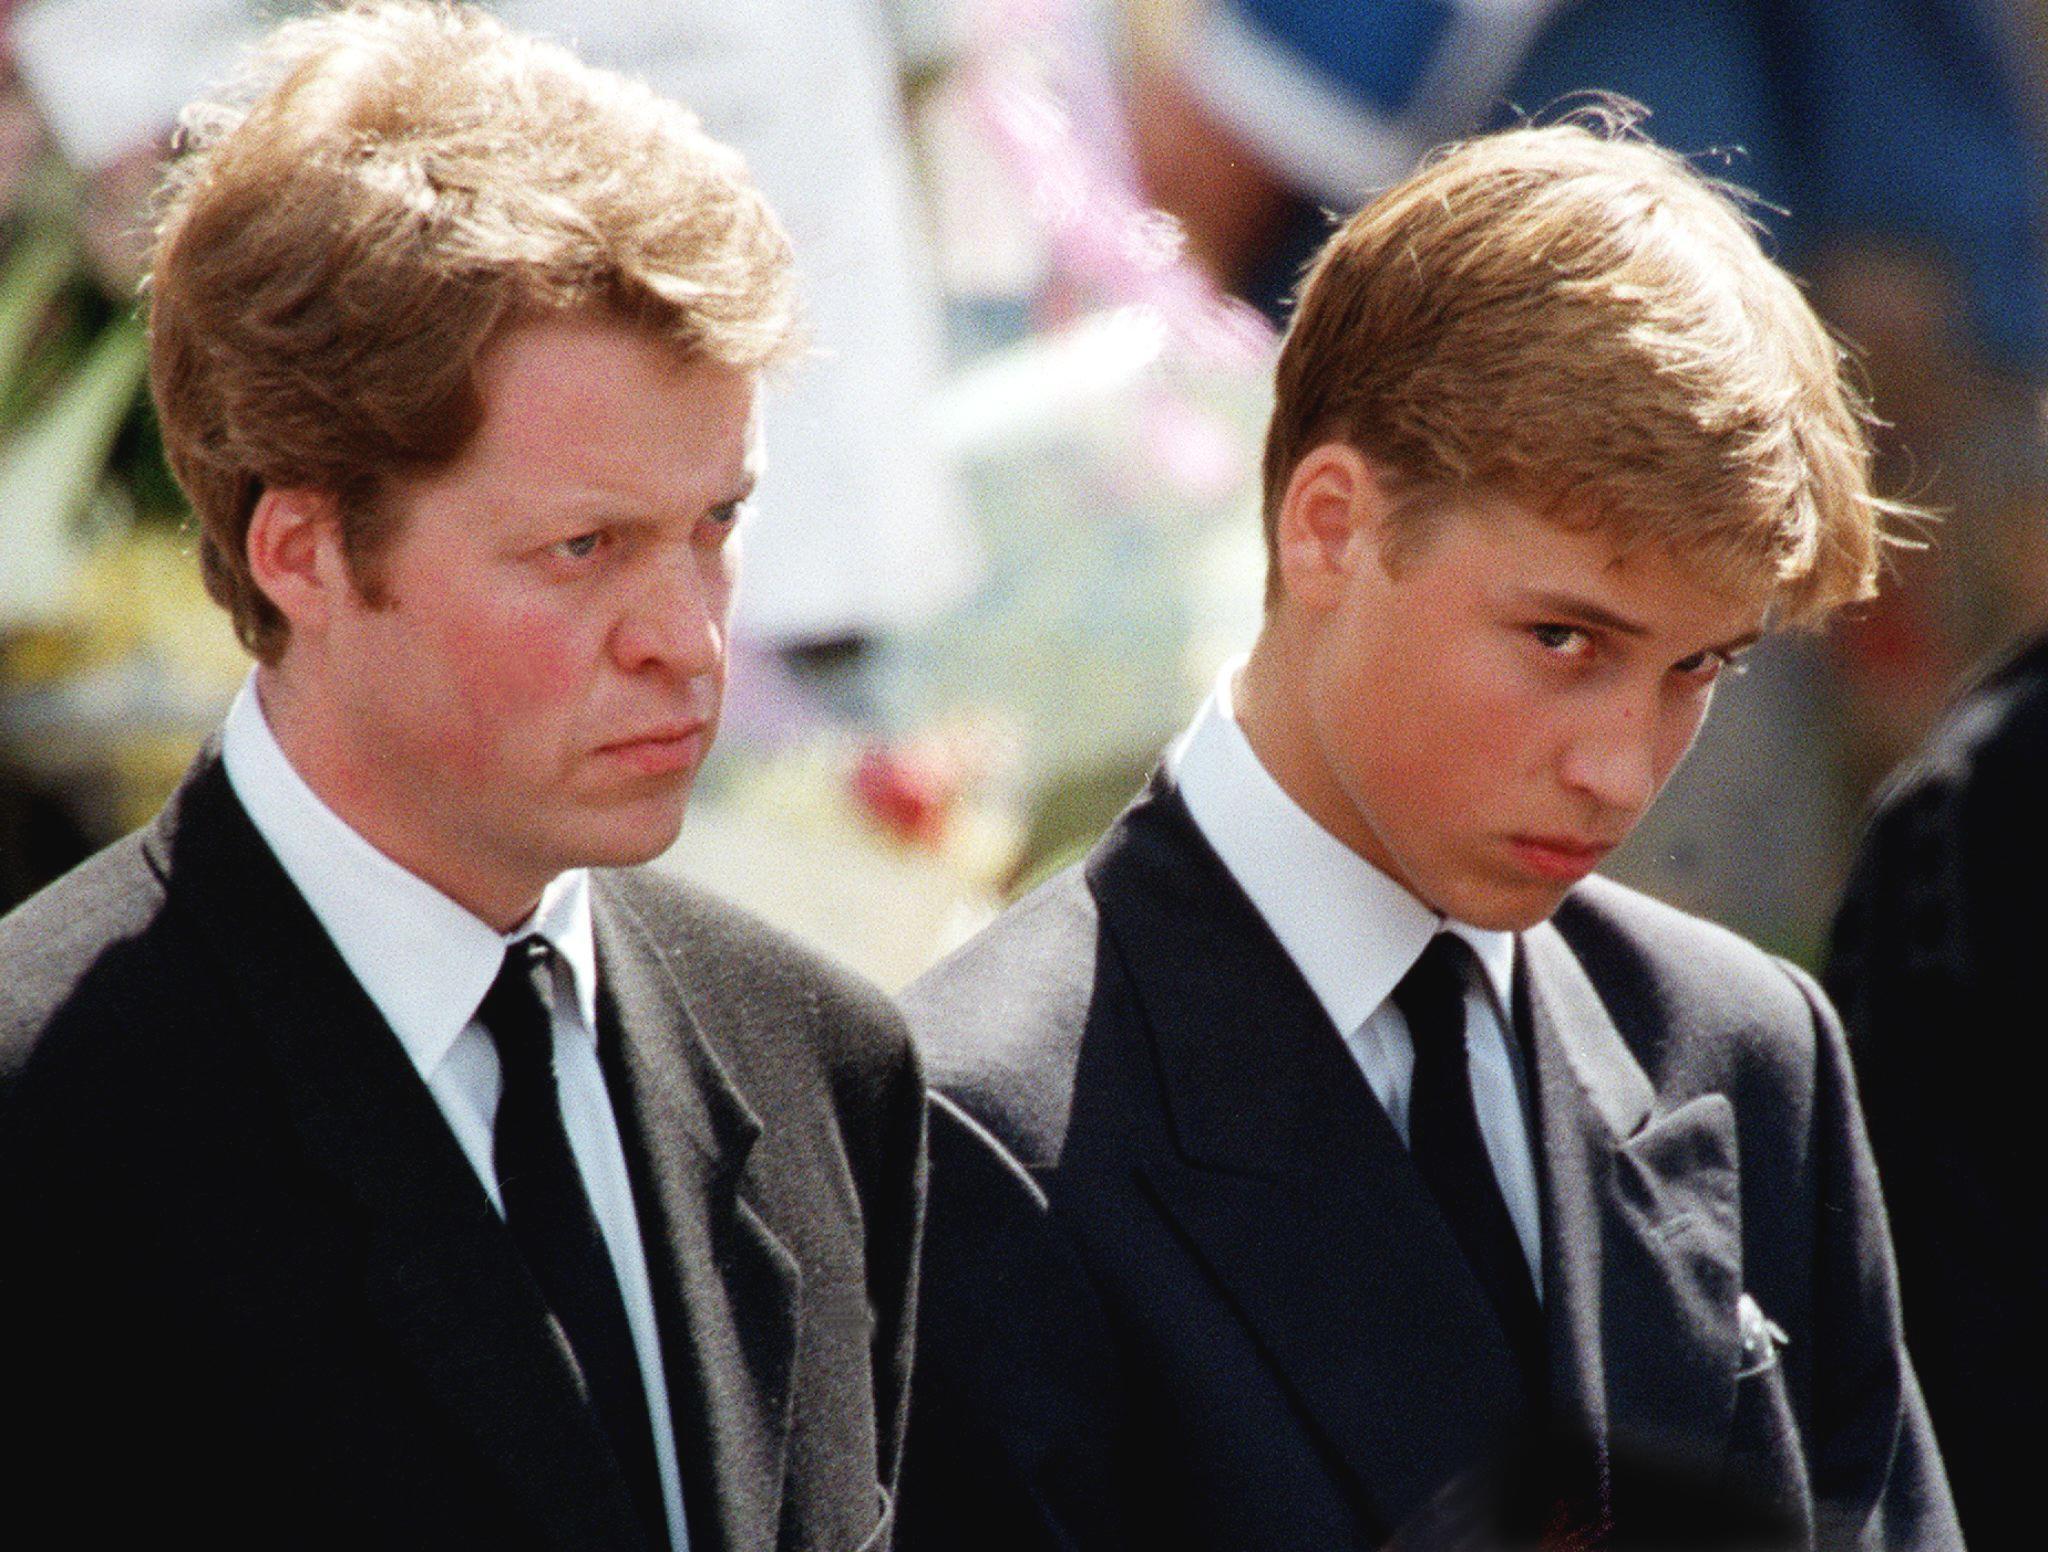 Prince William and her uncle Charles, Earl Spencer wait in front of Westminster Abbey to attend the funeral ceremony of Princess Diana on September 6, 1997 in London | Source: Getty Images